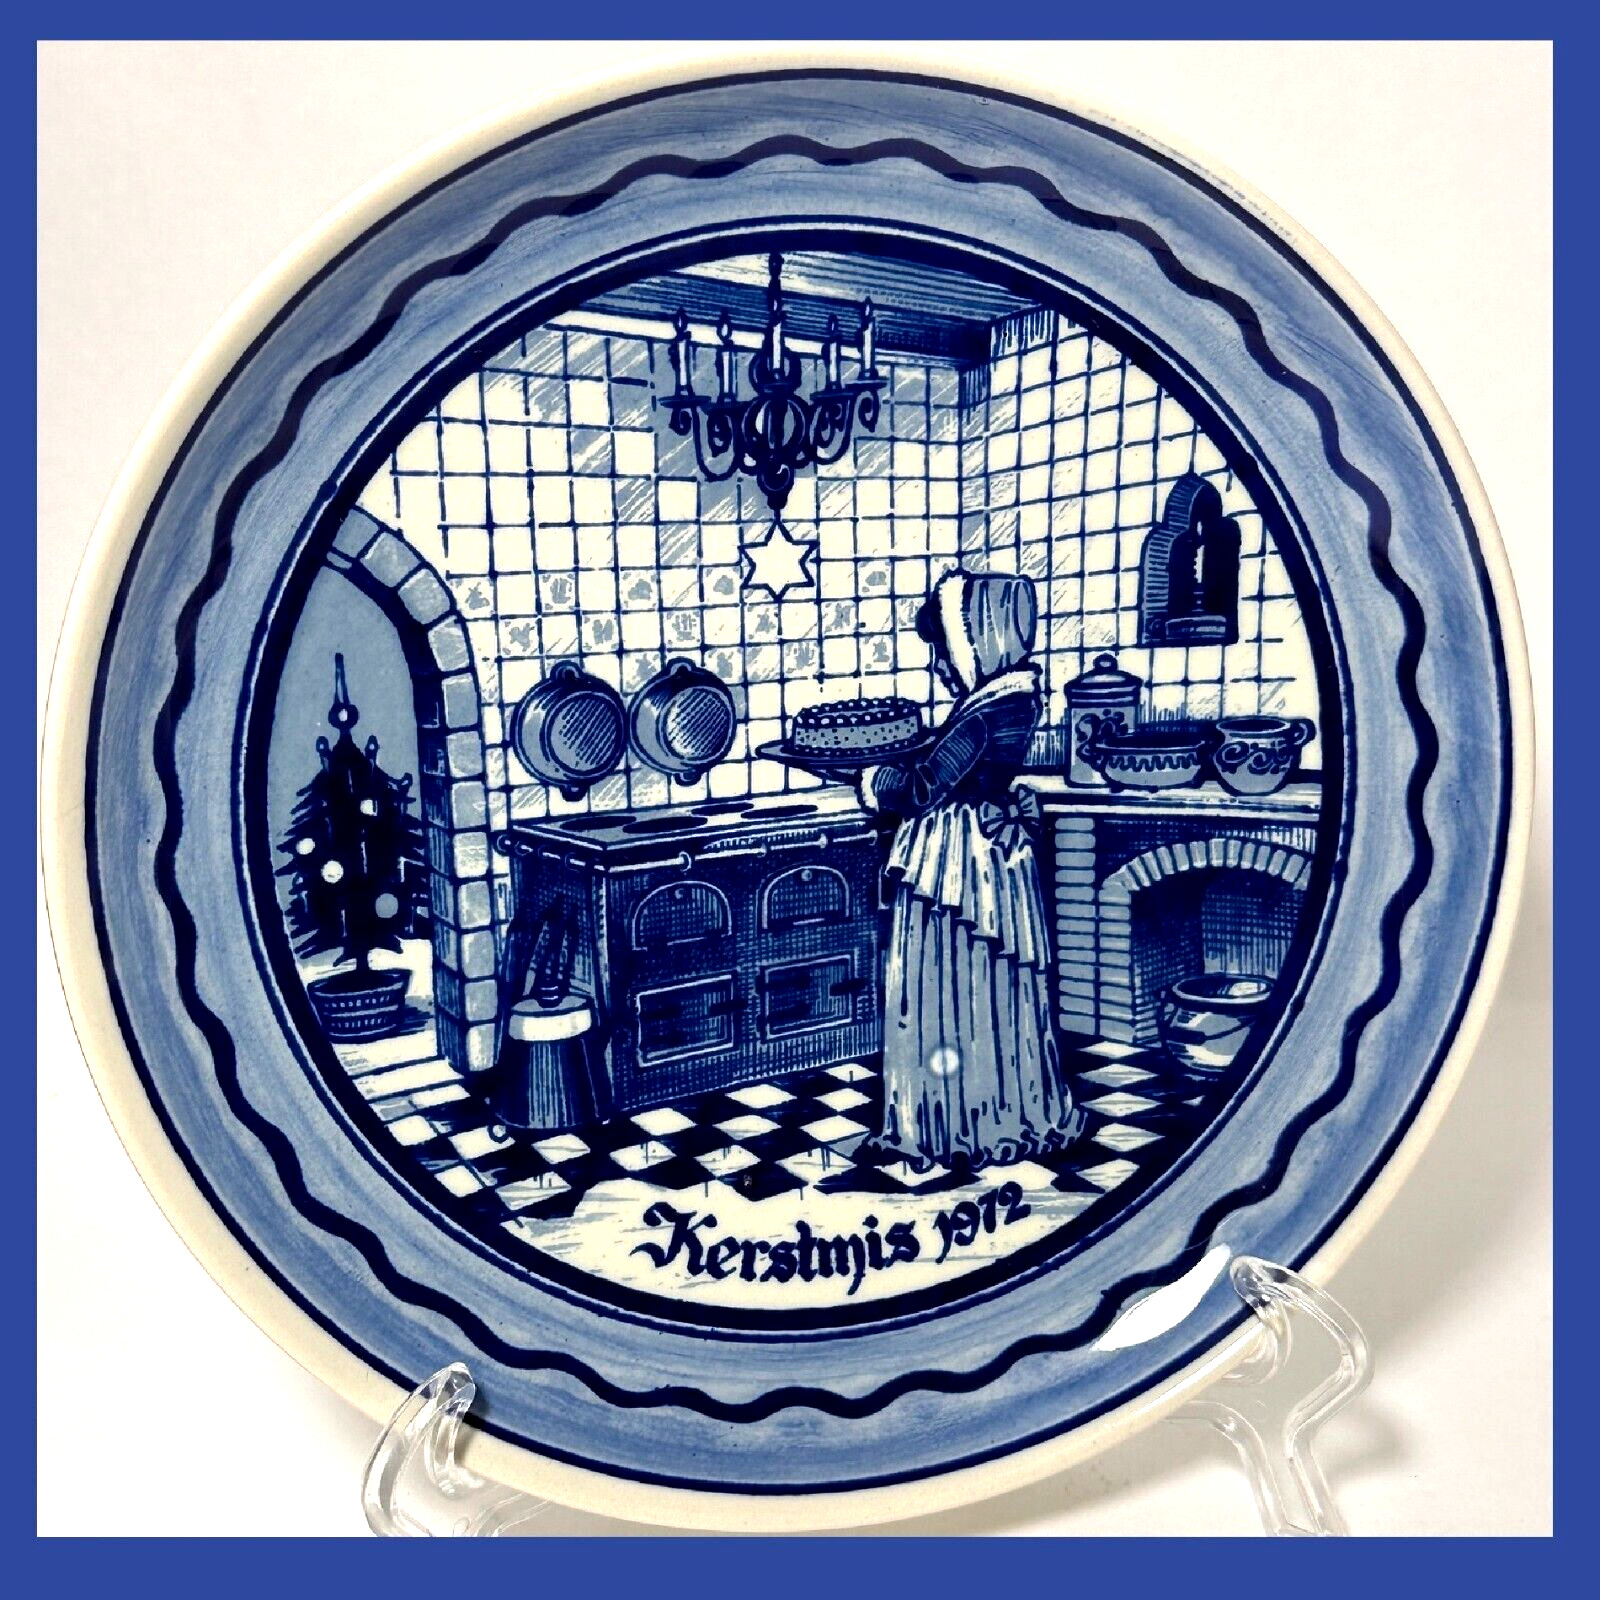 Kerstmis 1972 VK Delft Made in Holland Merry Xmas Navy Royal Cobalt Blue Plate